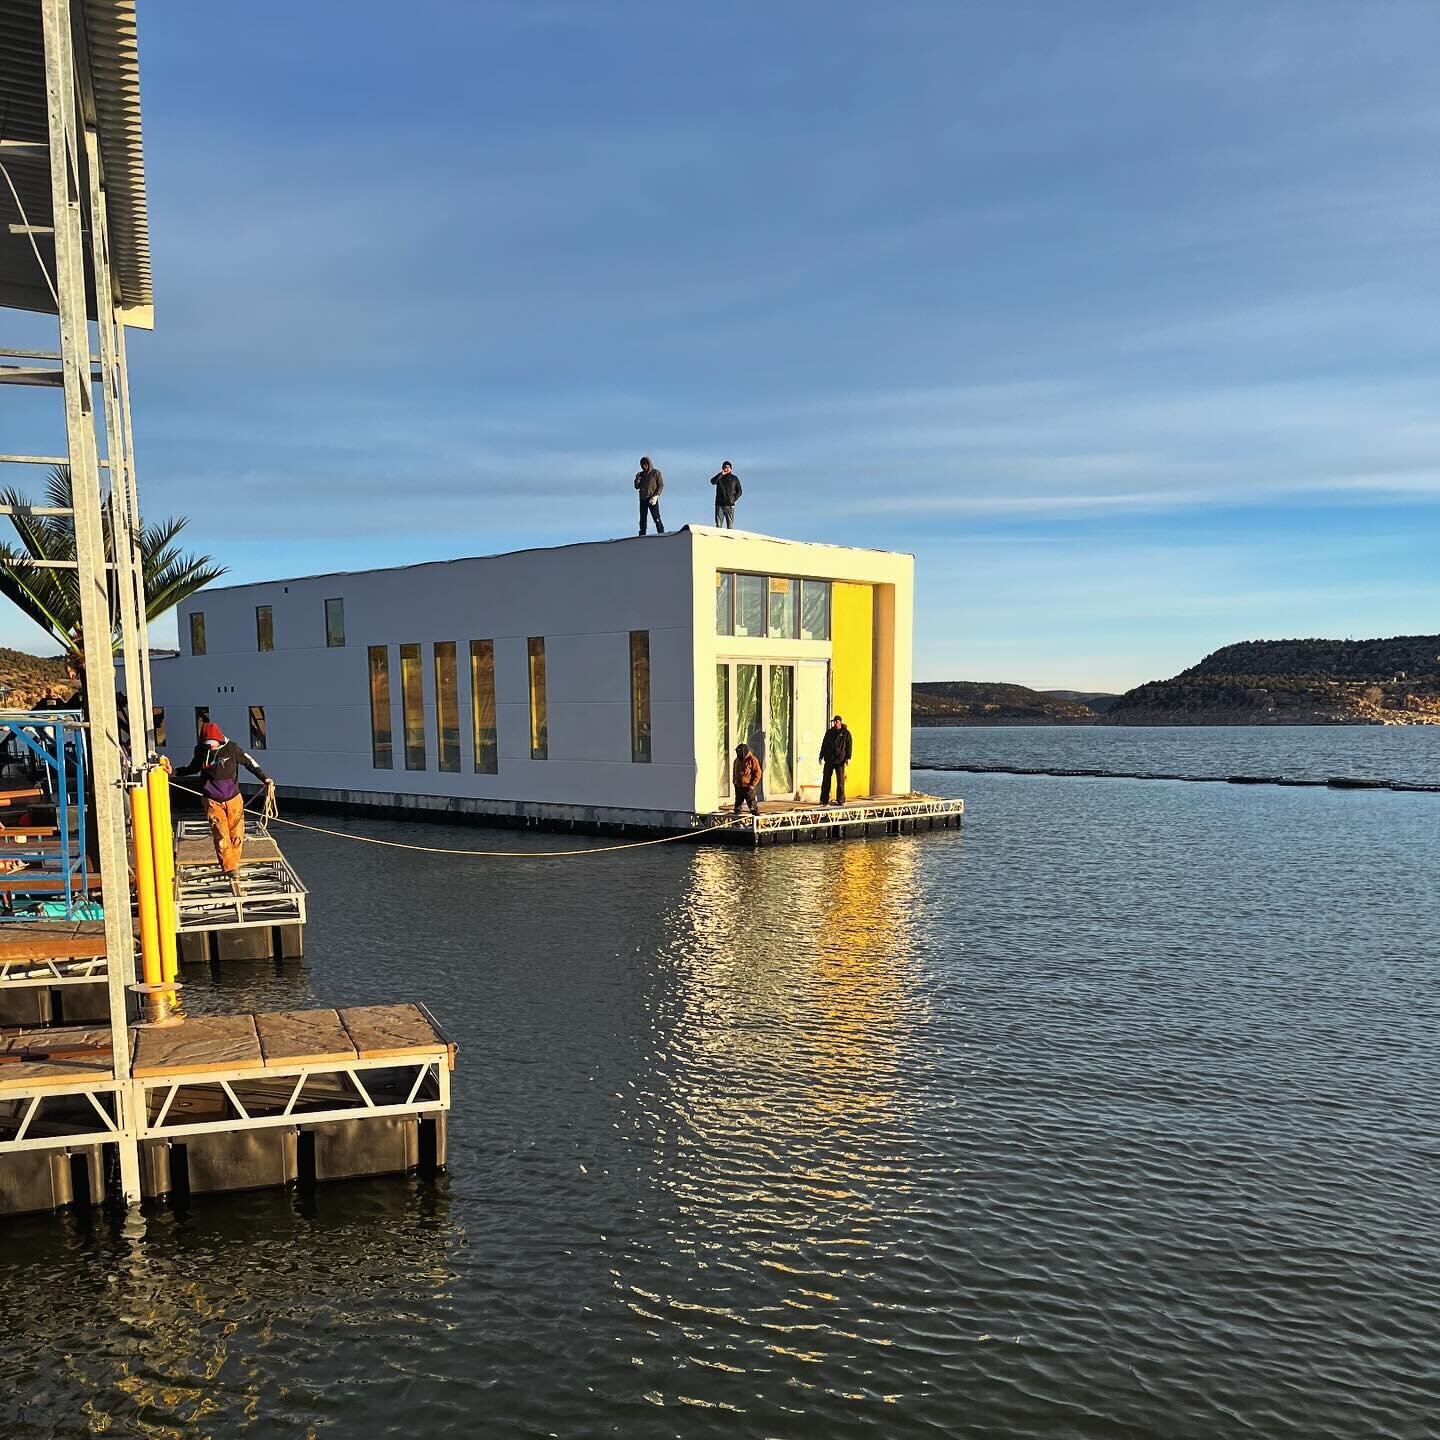 A unique opportunity recently came to the Formative studio. The chance to design a new boathouse at #navajolake in northern NM. Here we see the project floating to its new, permanent home. 

🔨: #wintersconstruction 

#boathouse #homedesign #whatever